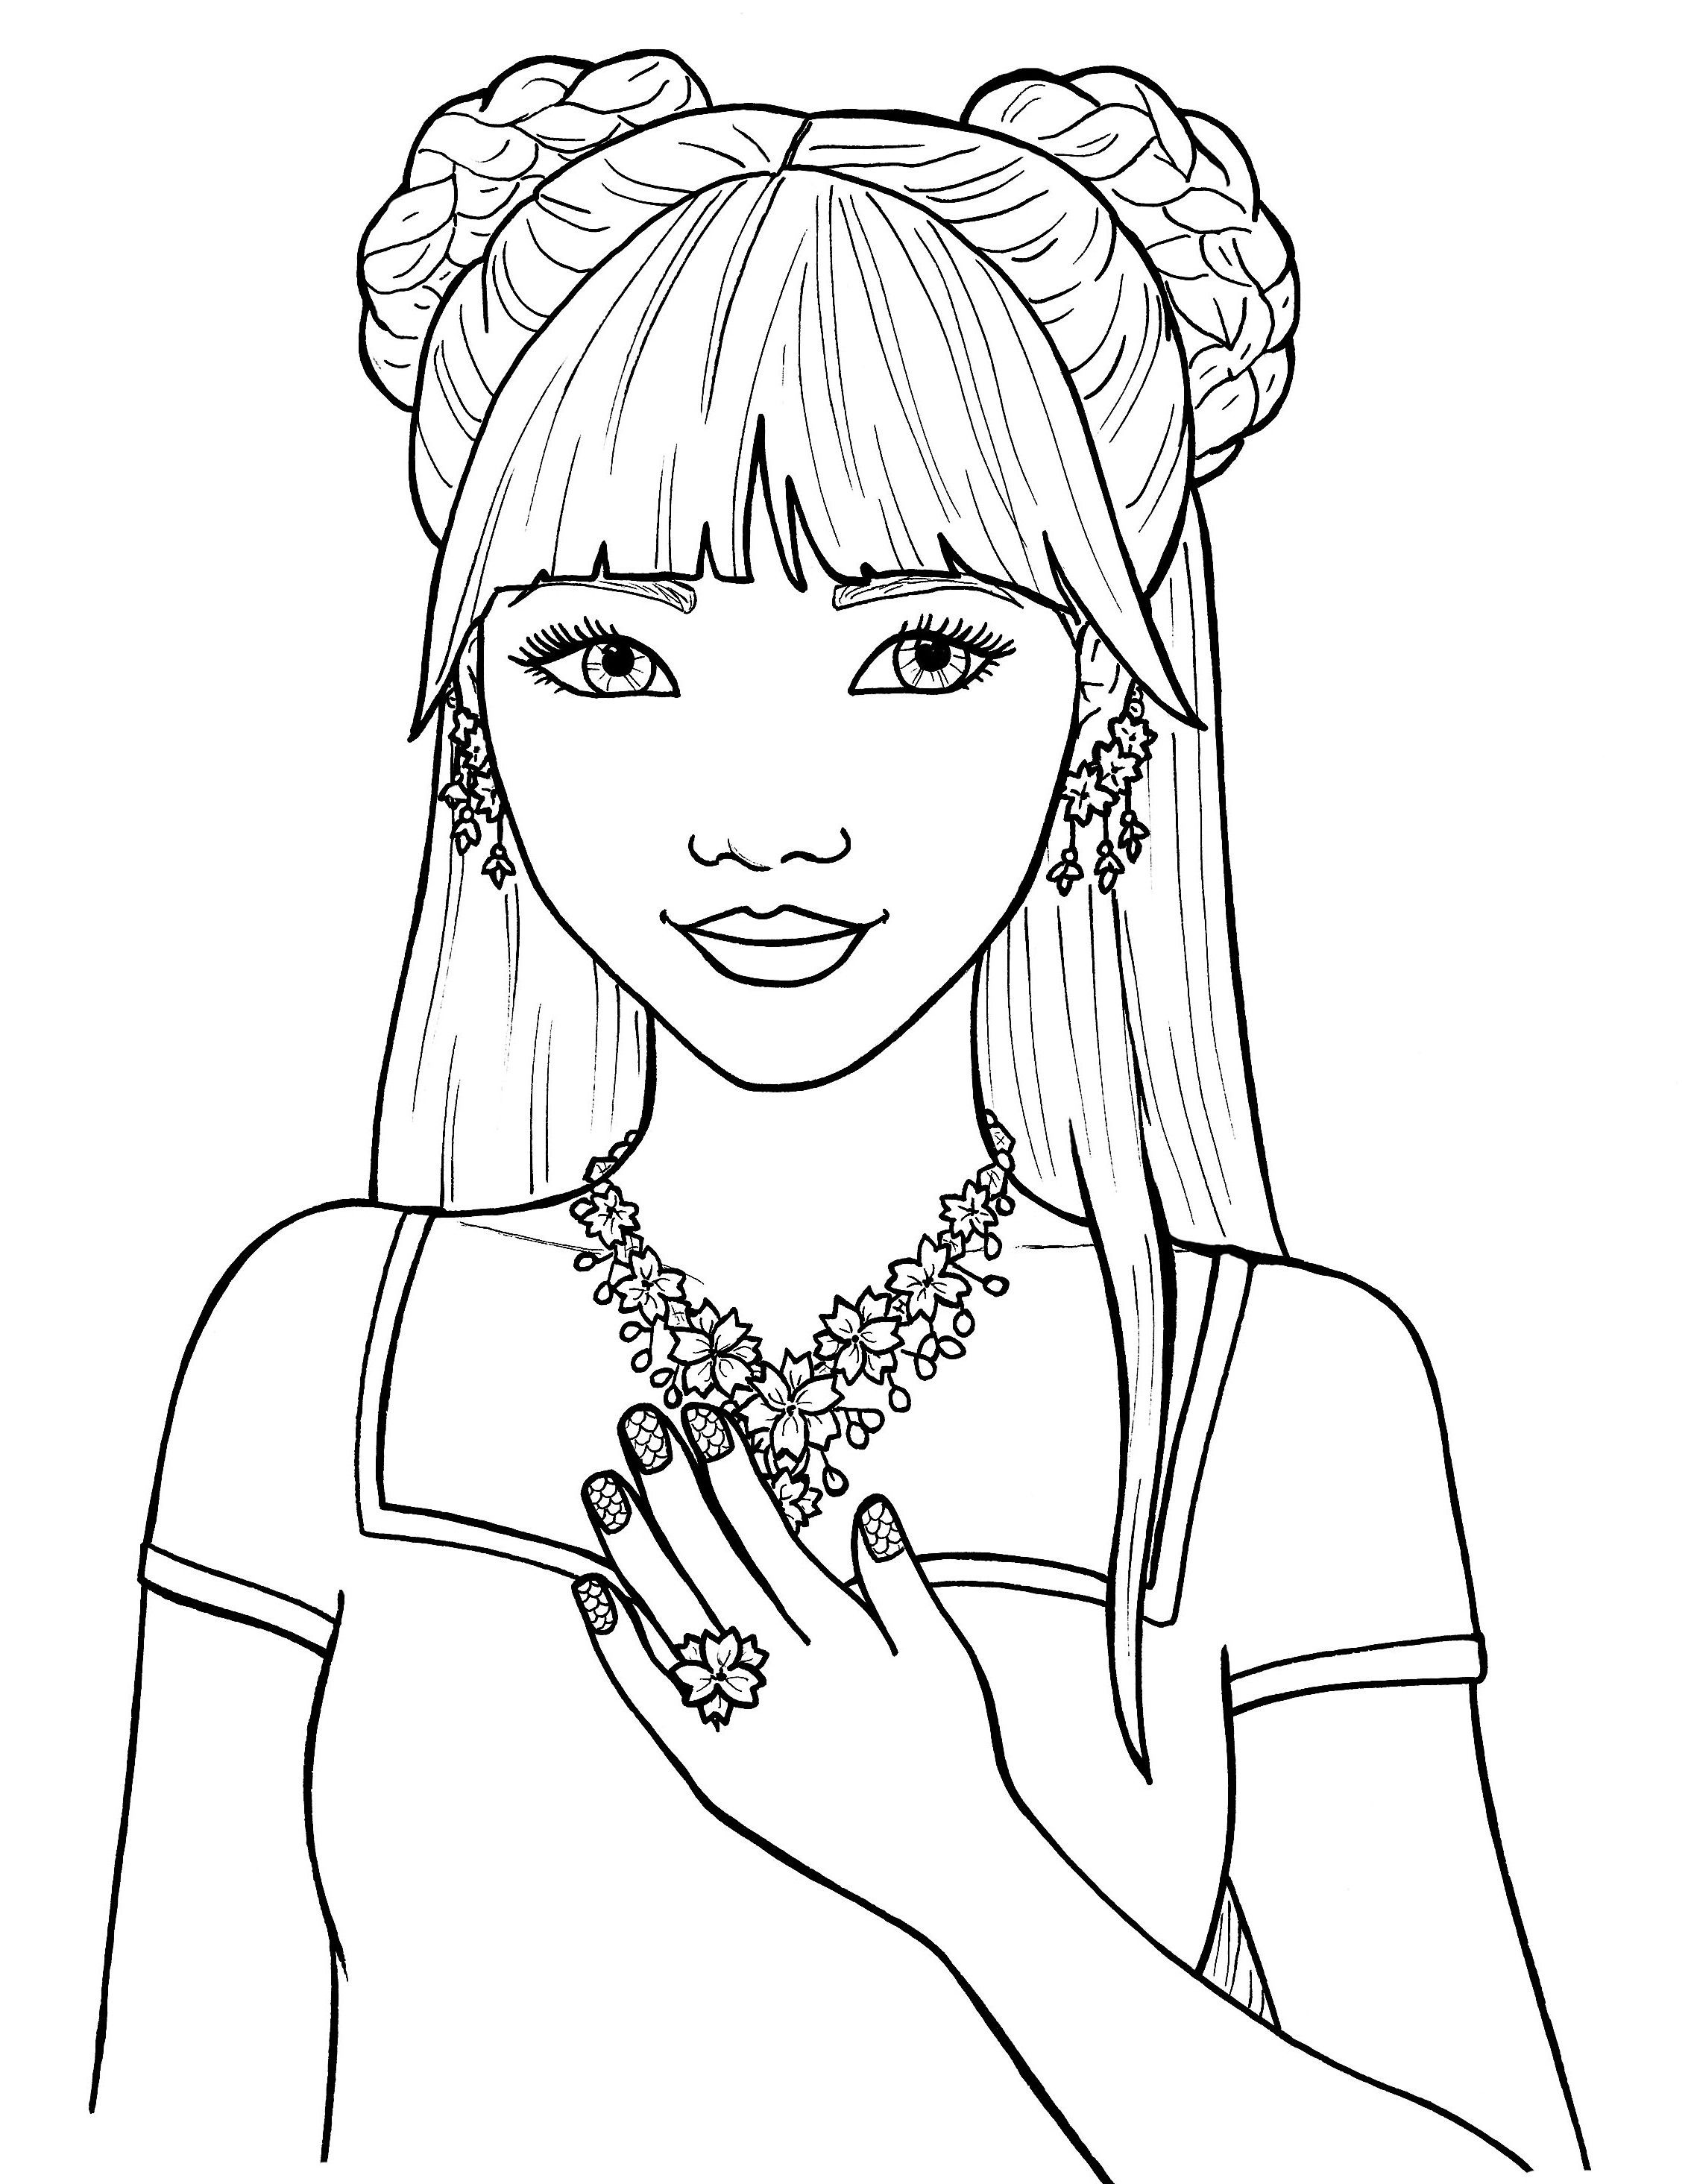 Coloring Pages Of Pretty Girls
 Pretty Girls Coloring Pages Free feetjies